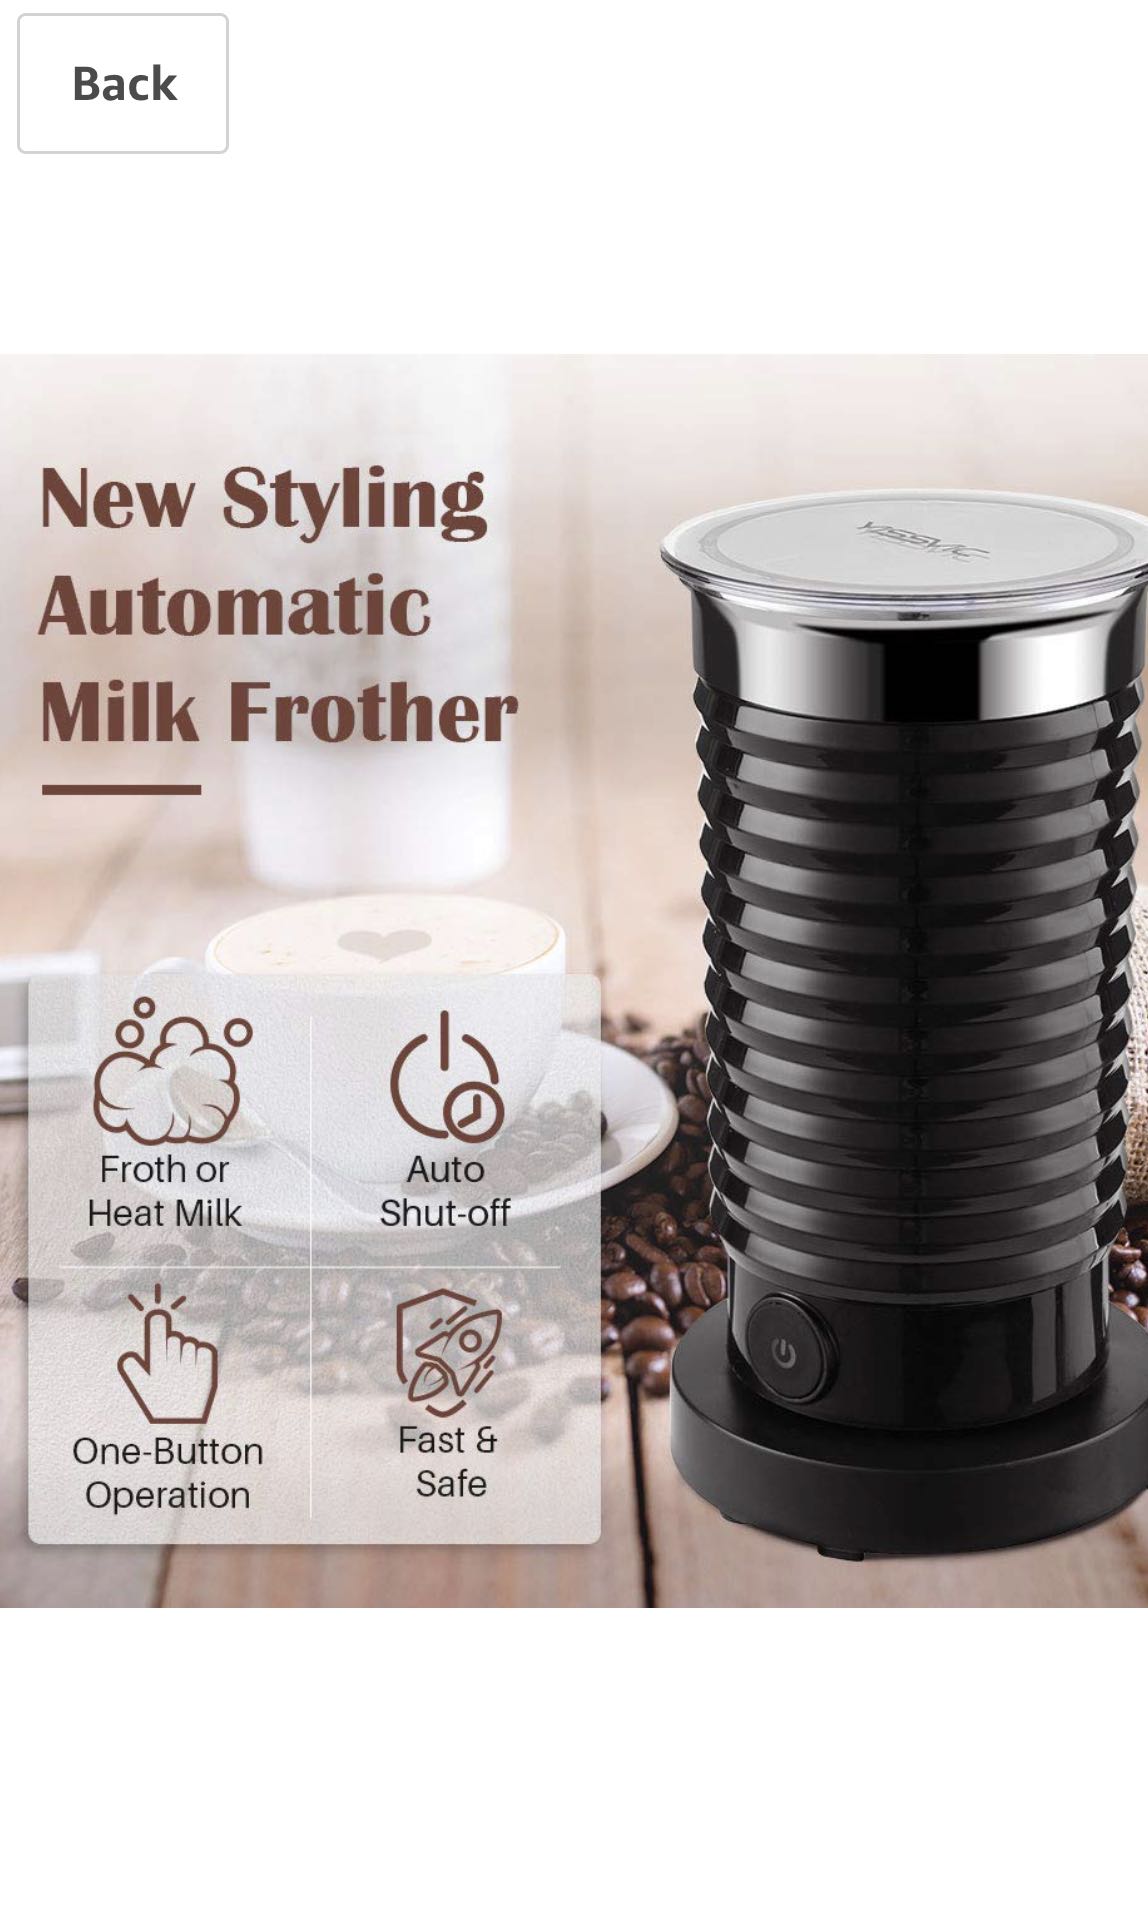 YISSVIC Milk Frother Electric Milk Steamer Automatic Hot or Cold